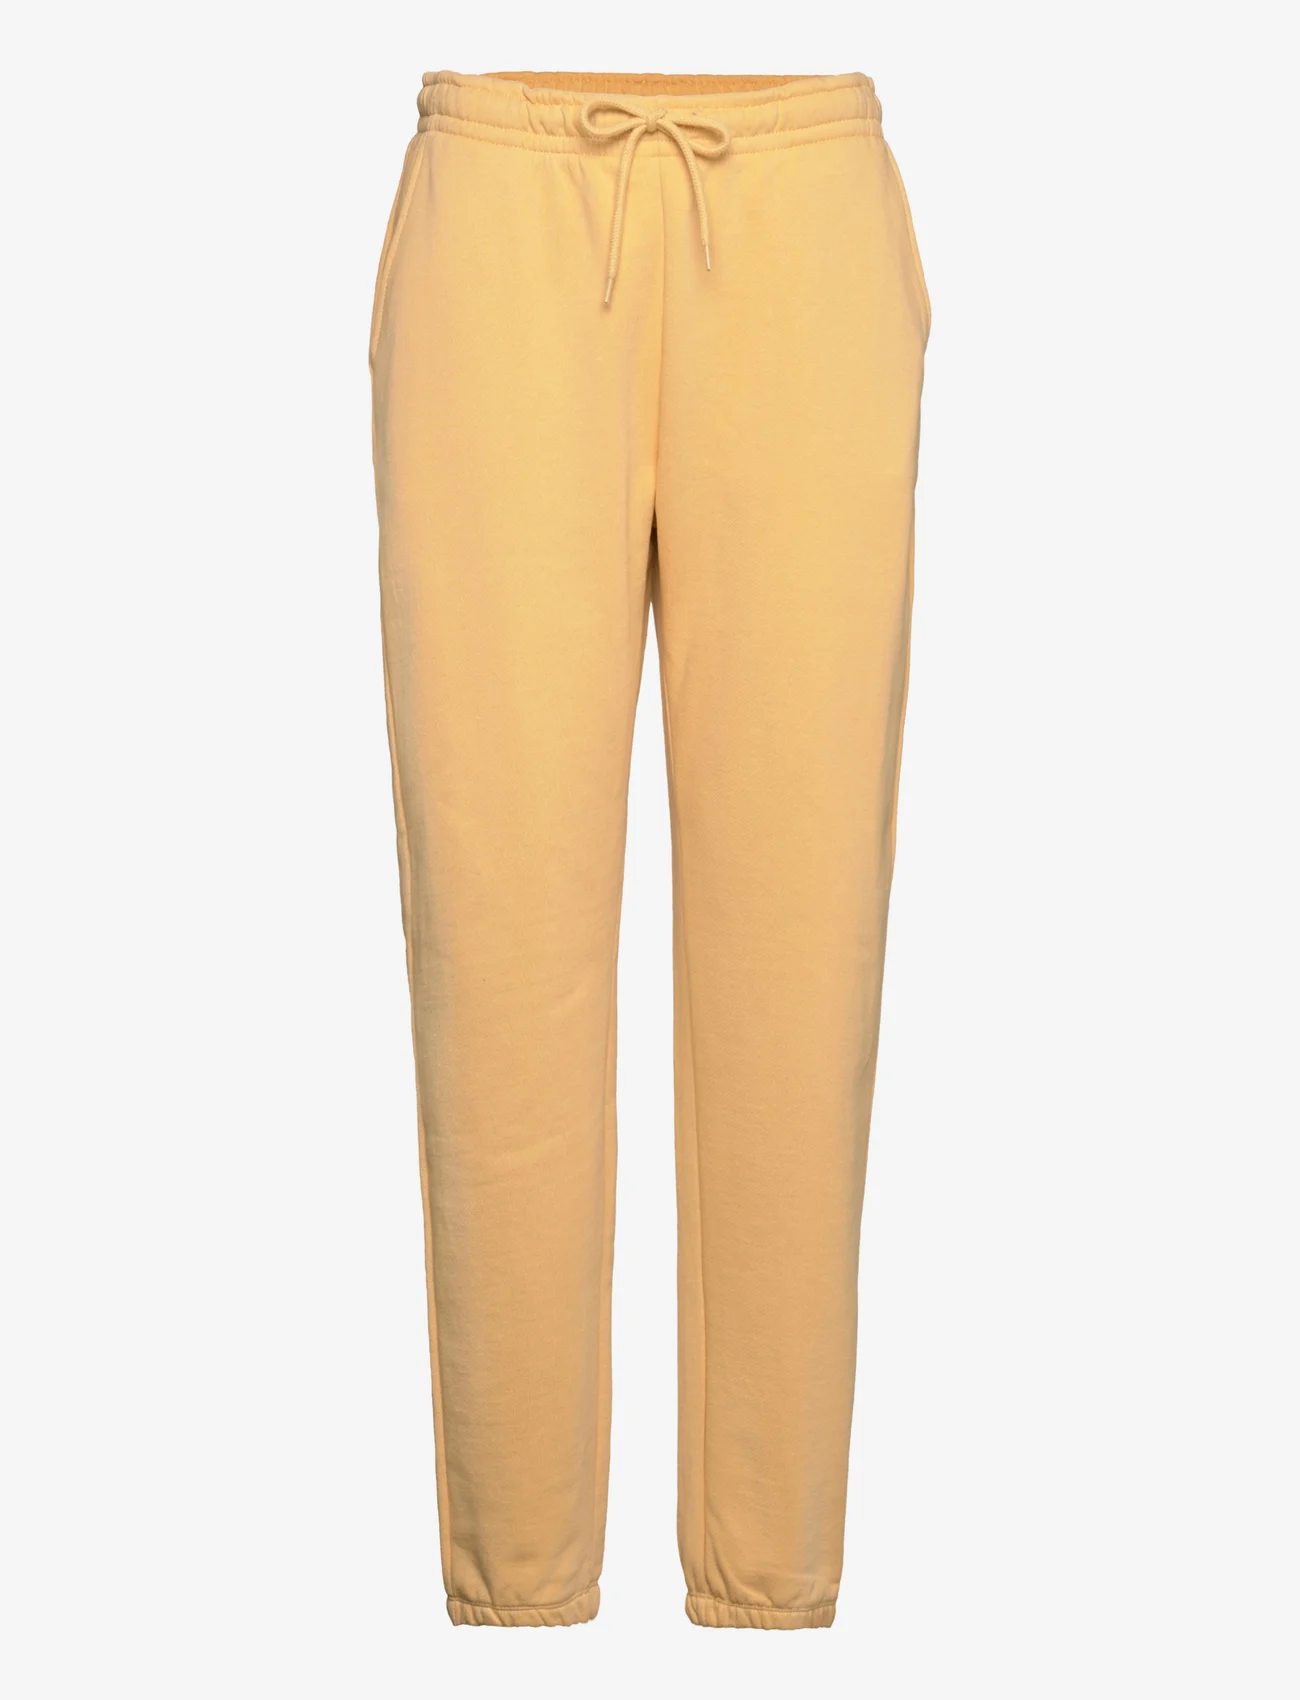 Bread & Boxers - Sweatpants - naised - soft yellow - 0